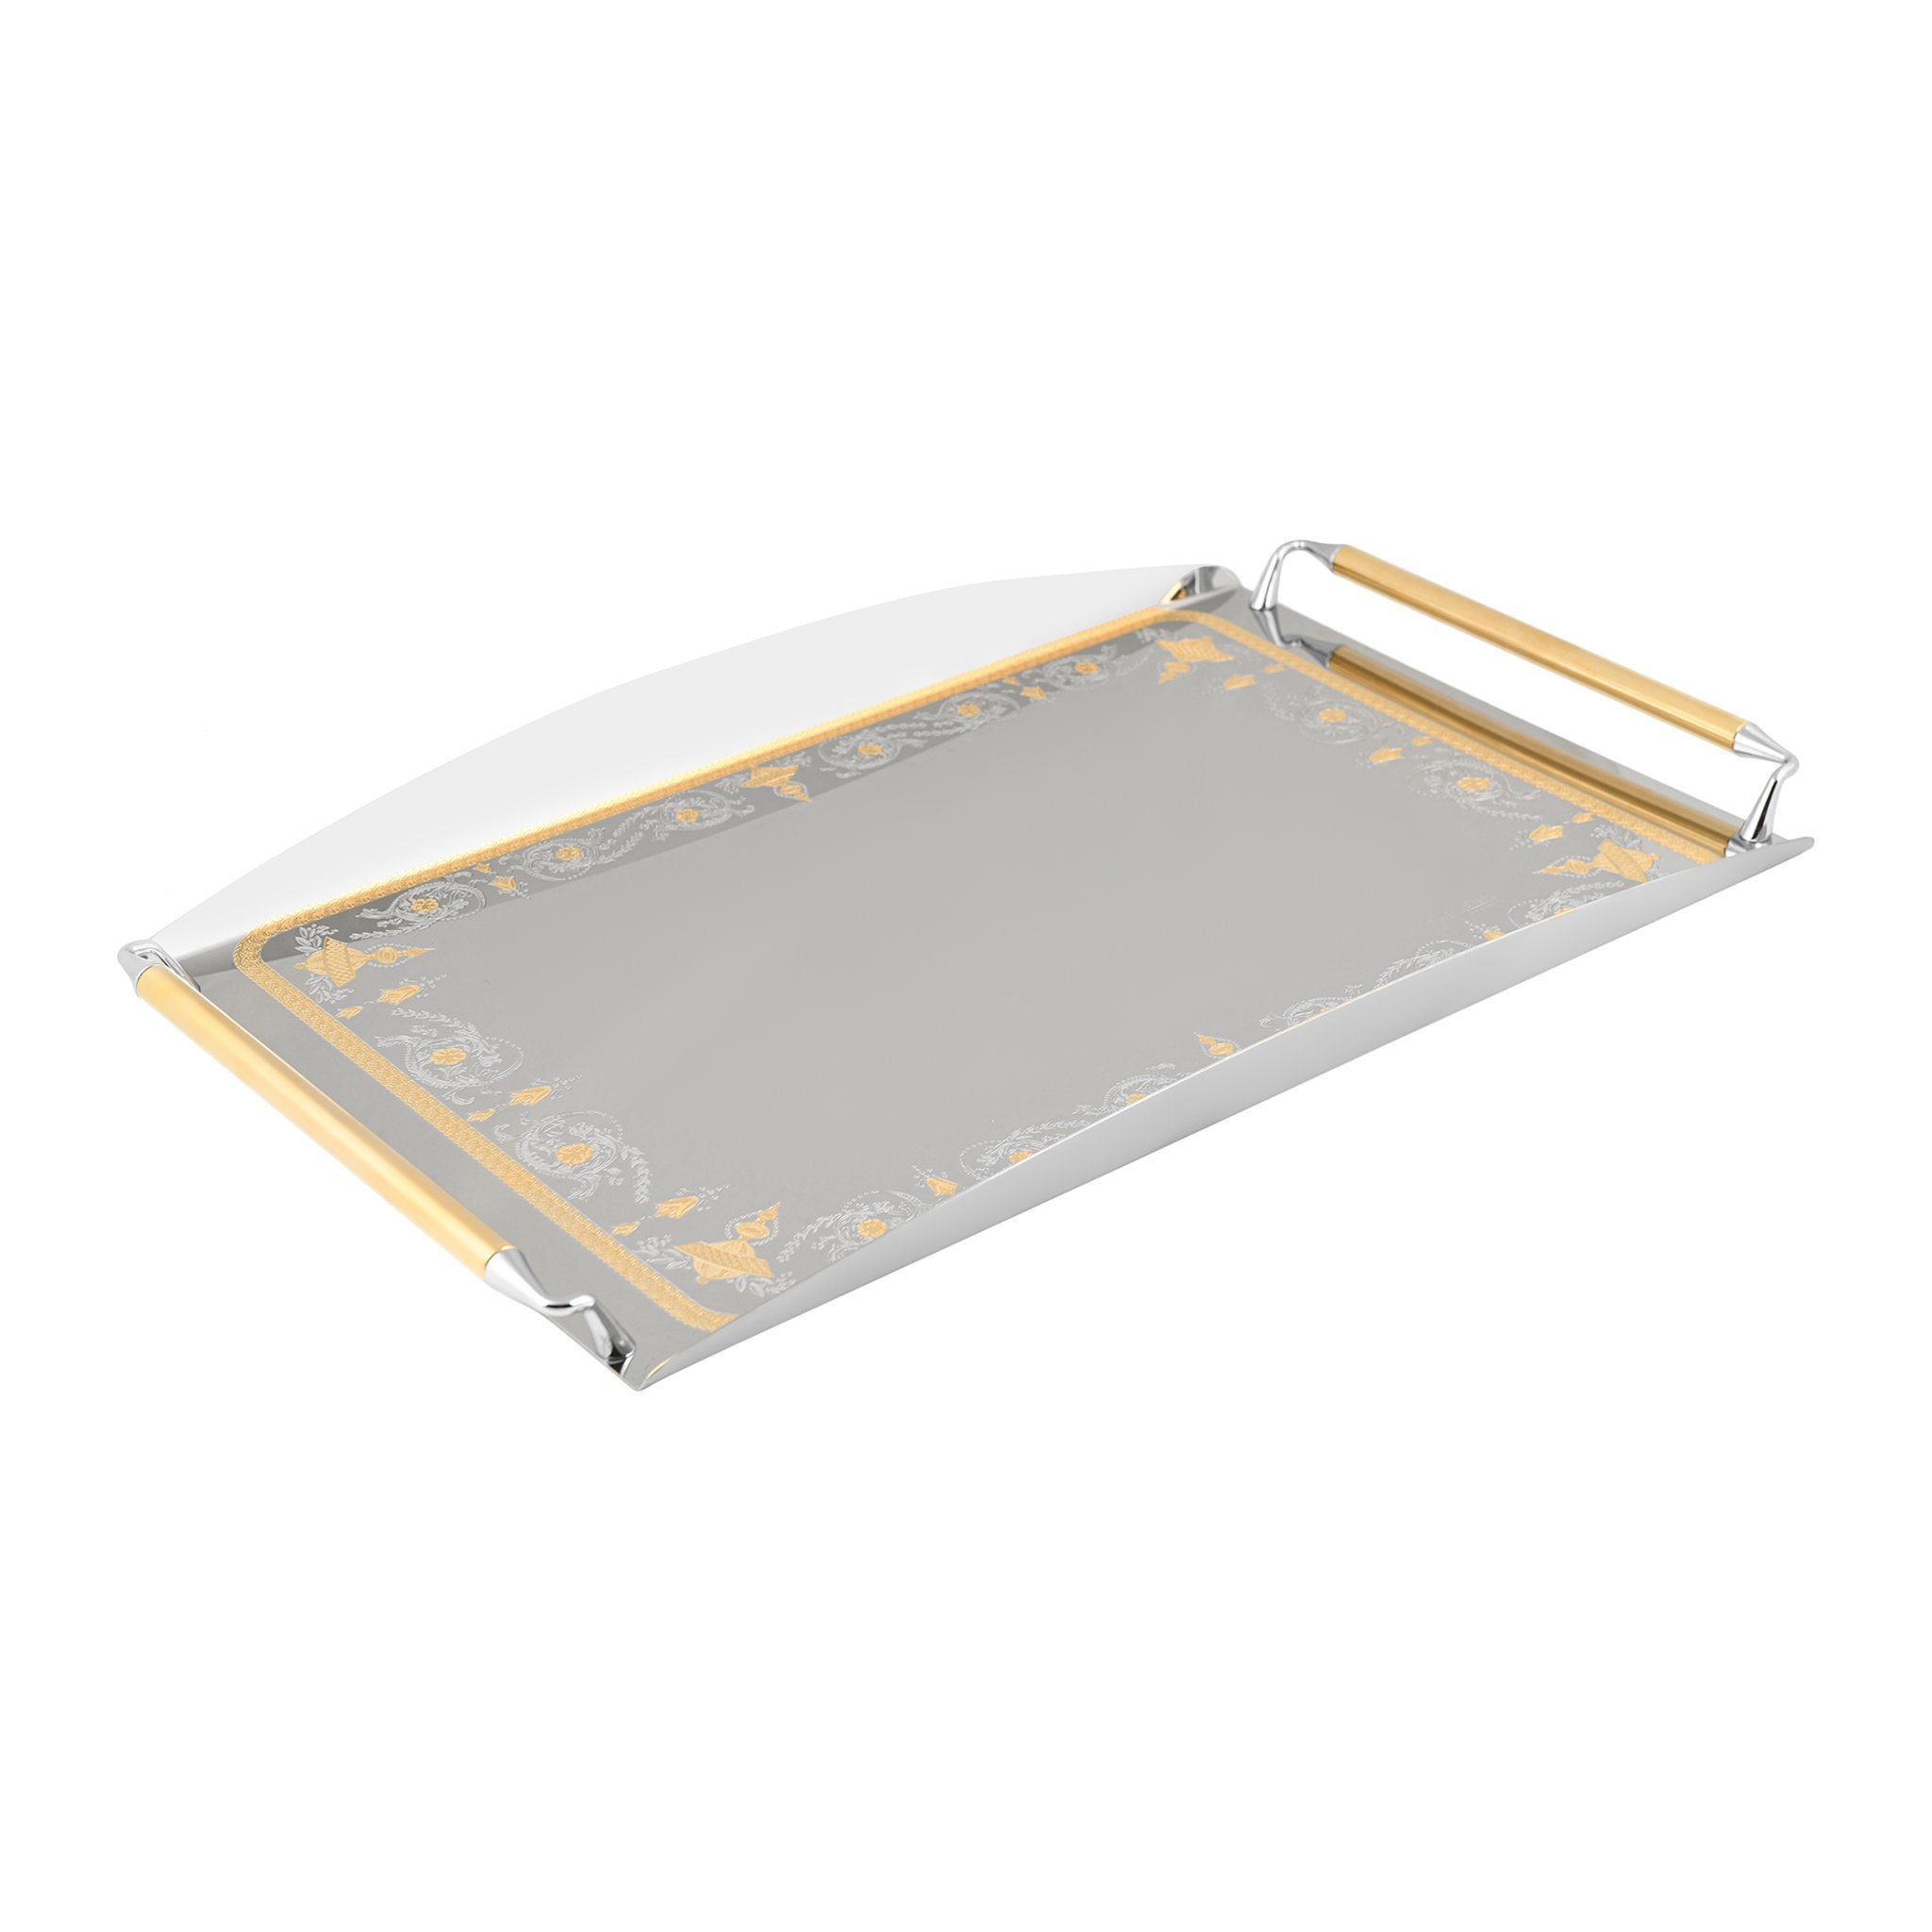 Elegant Gioiel - Rectangular Tray with Handles - Gold - Stainless Steel 18/10 - 55x39cm - 75000173